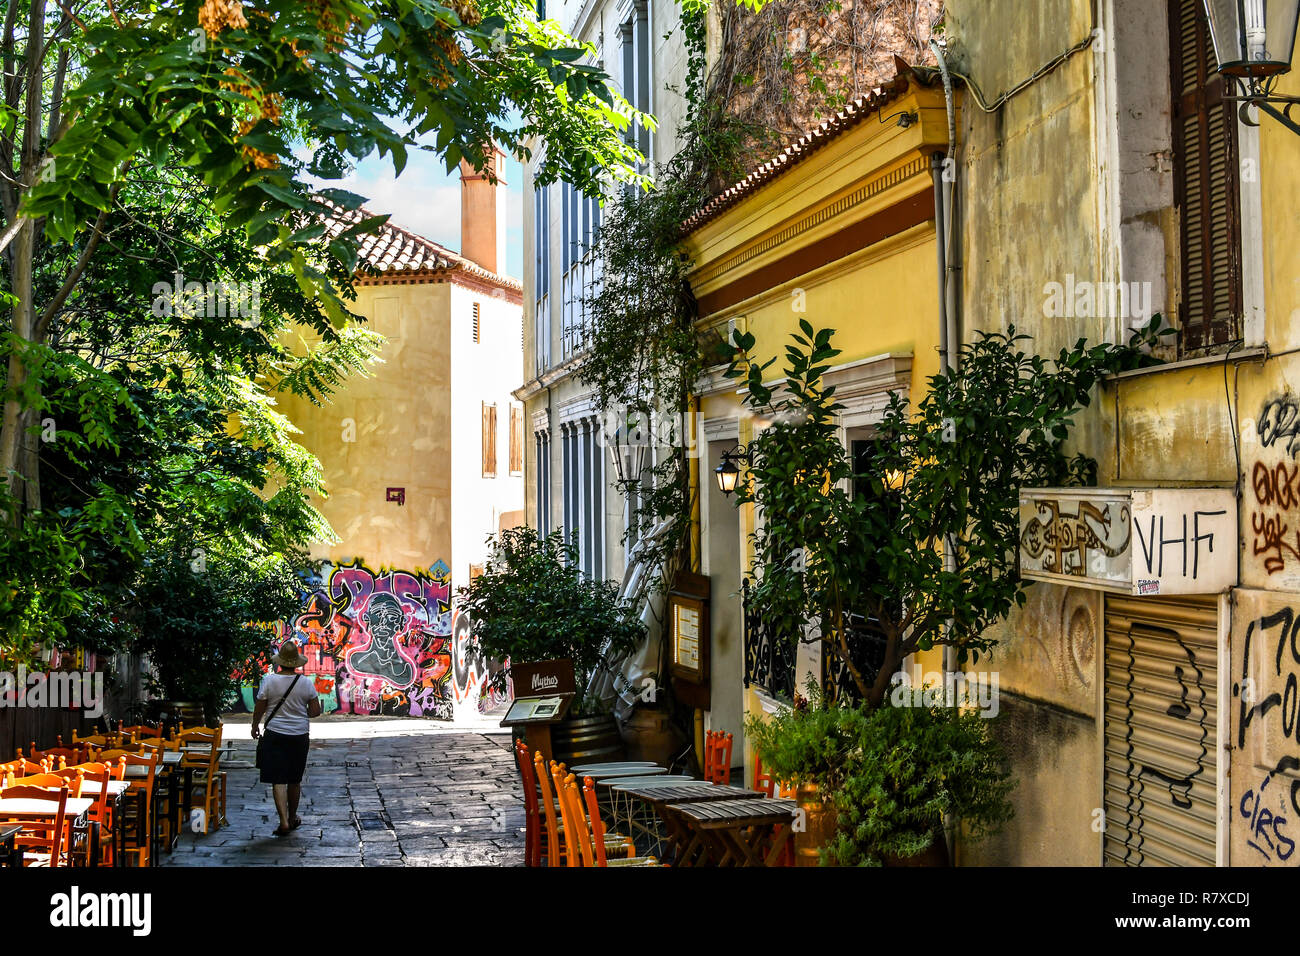 A solo female tourist walks past a small cafe with outdoor tables on a narrow shaded alley in the Plaka district of Athens, Greece Stock Photo